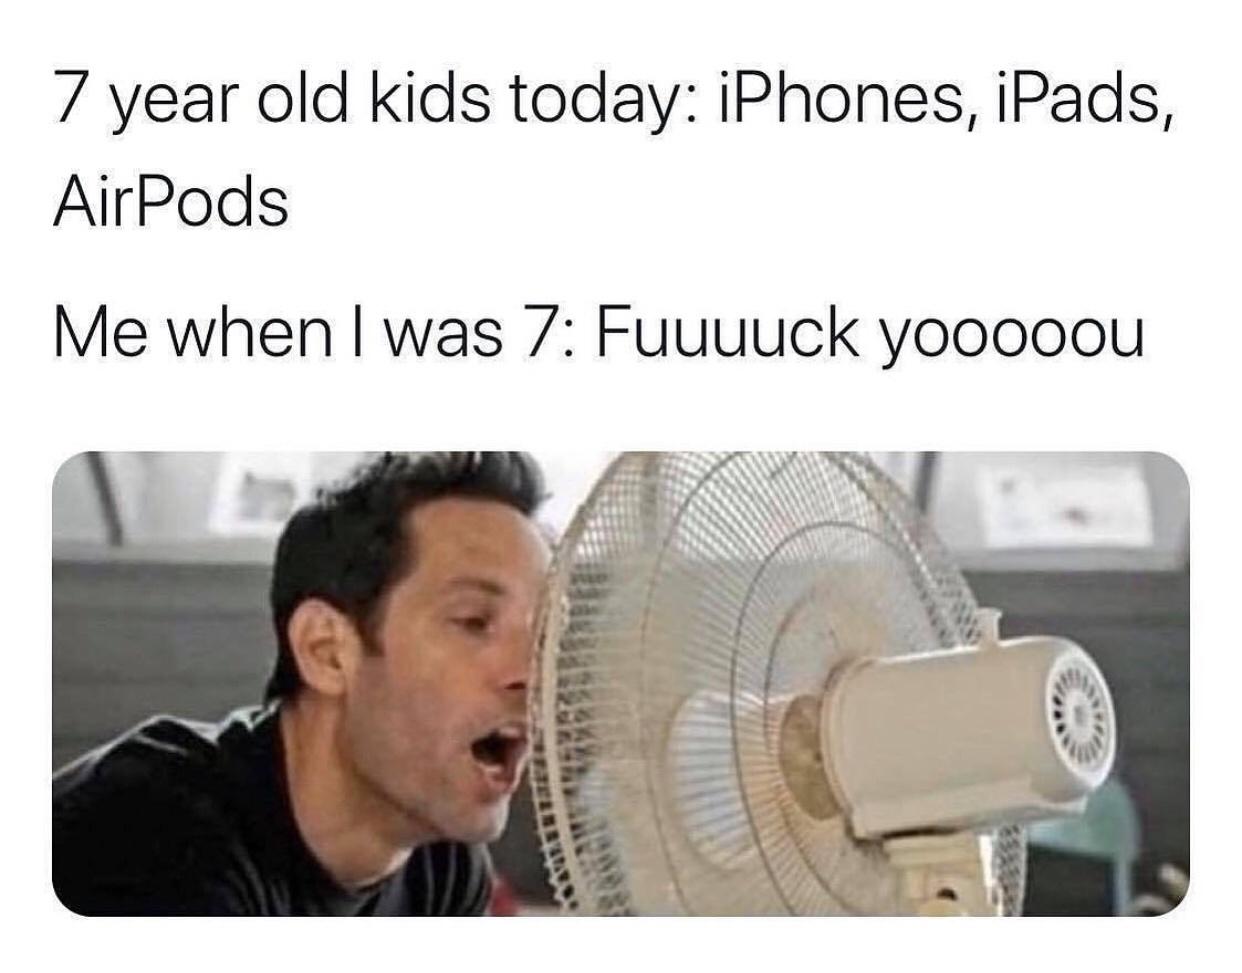 7 year old kids today meme - 7 year old kids today iPhones, iPads, AirPods Me when I was 7 Fuuuuck yooooou